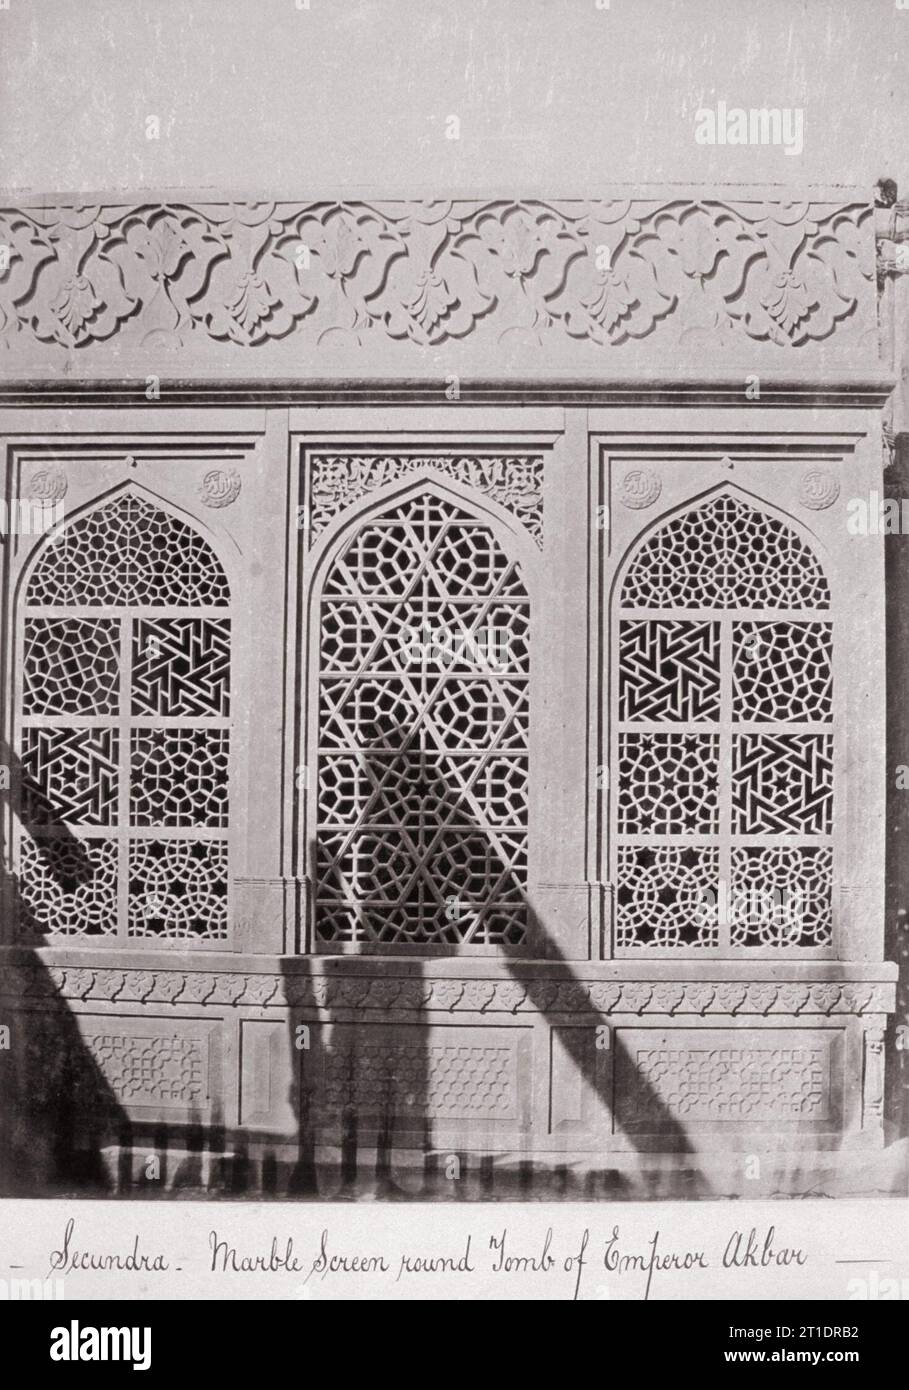 Secundra, Marble Screen round Tomb of Emperor Akabar, Late 1860s. Stock Photo